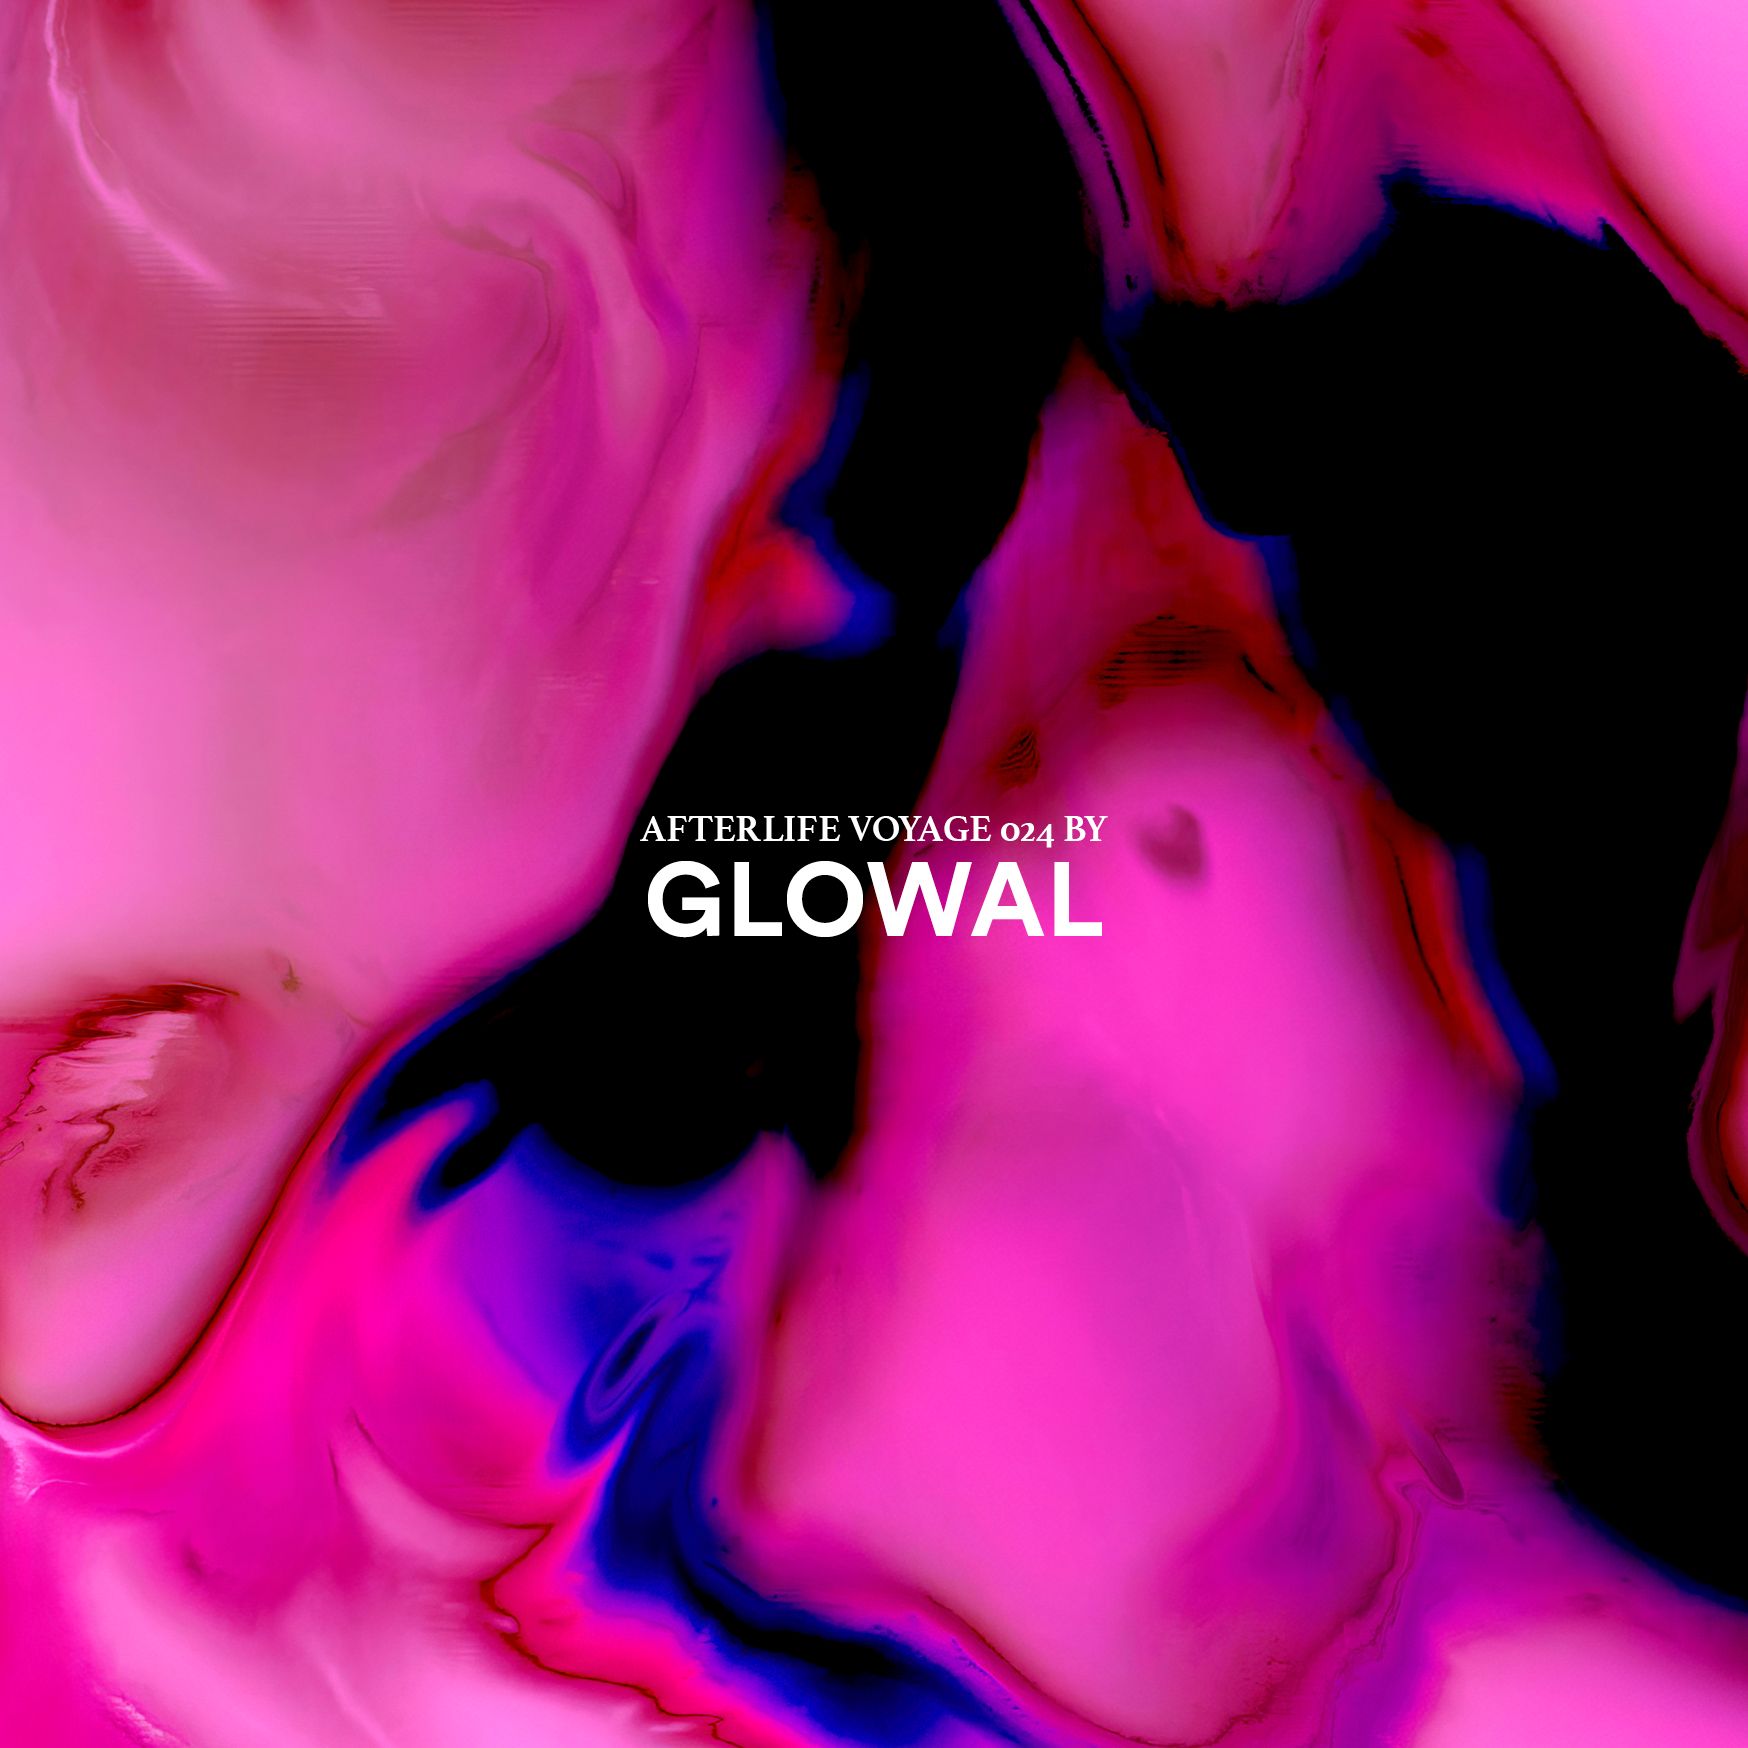 Afterlife Voyage 024 by Glowal